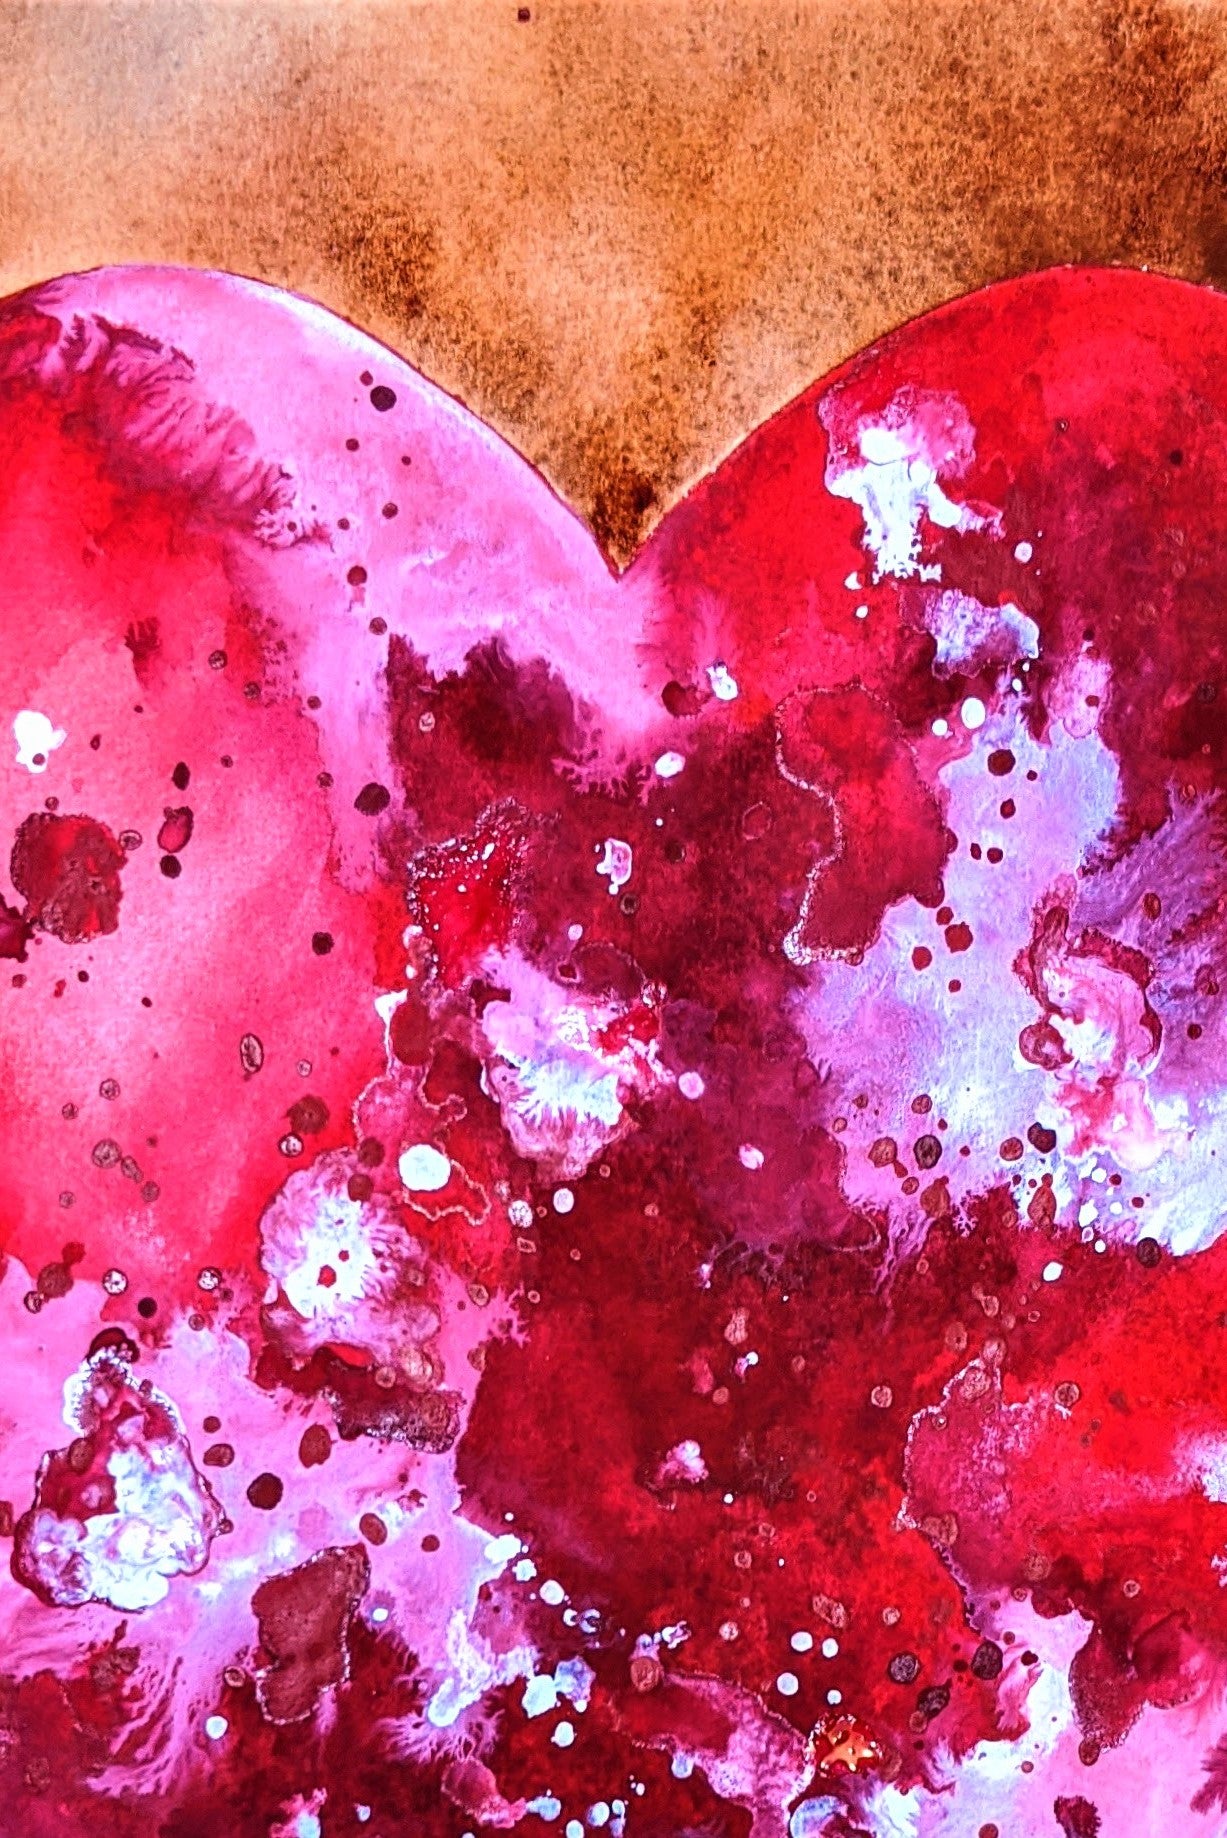 Full Heart watercolor painting on paper detail